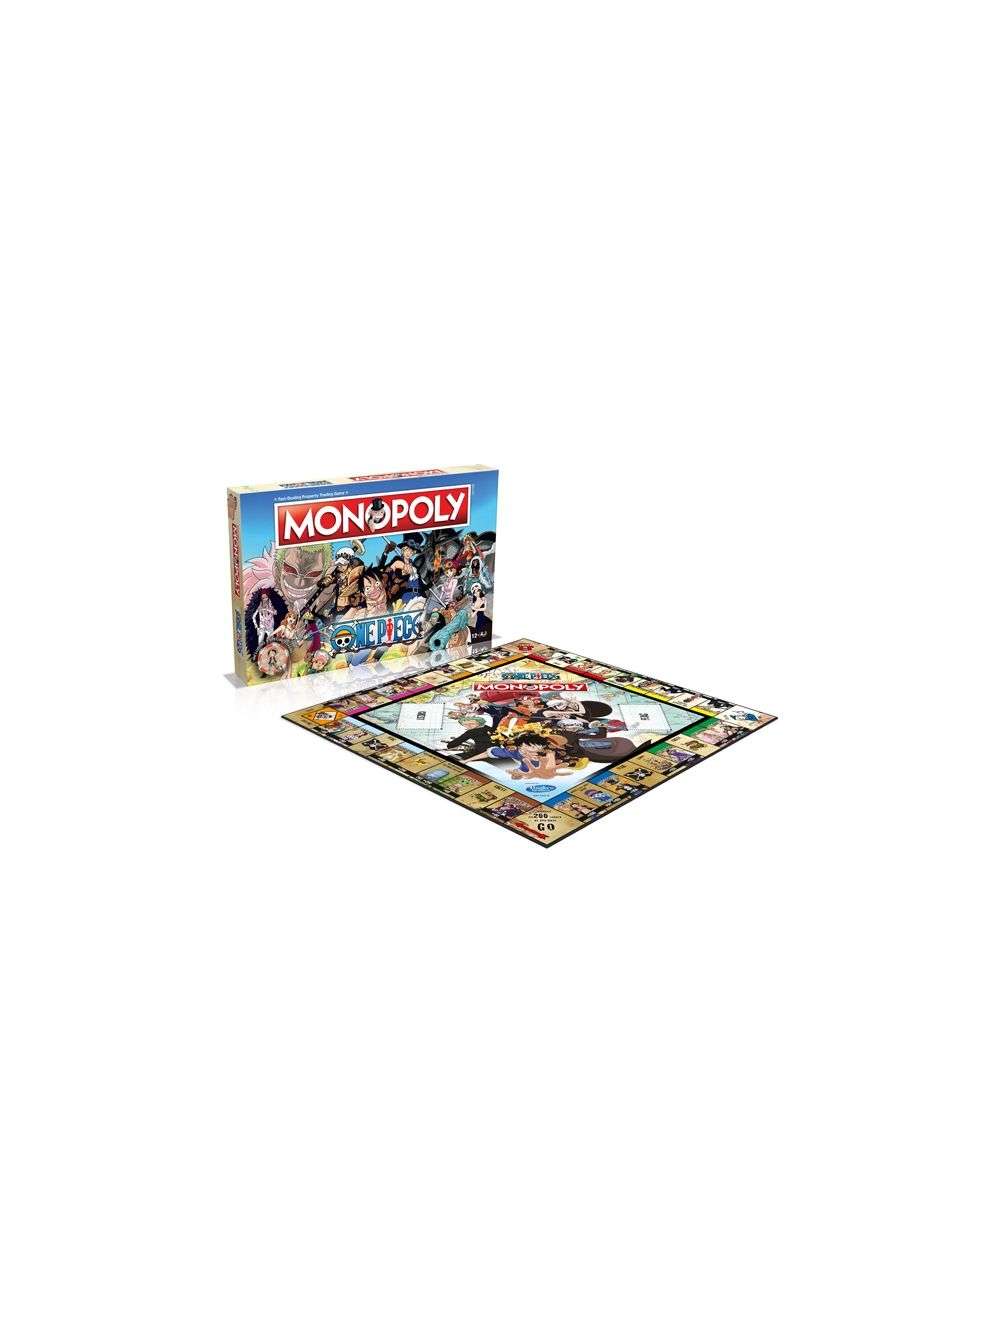 ONE PIECE - MONOPOLY